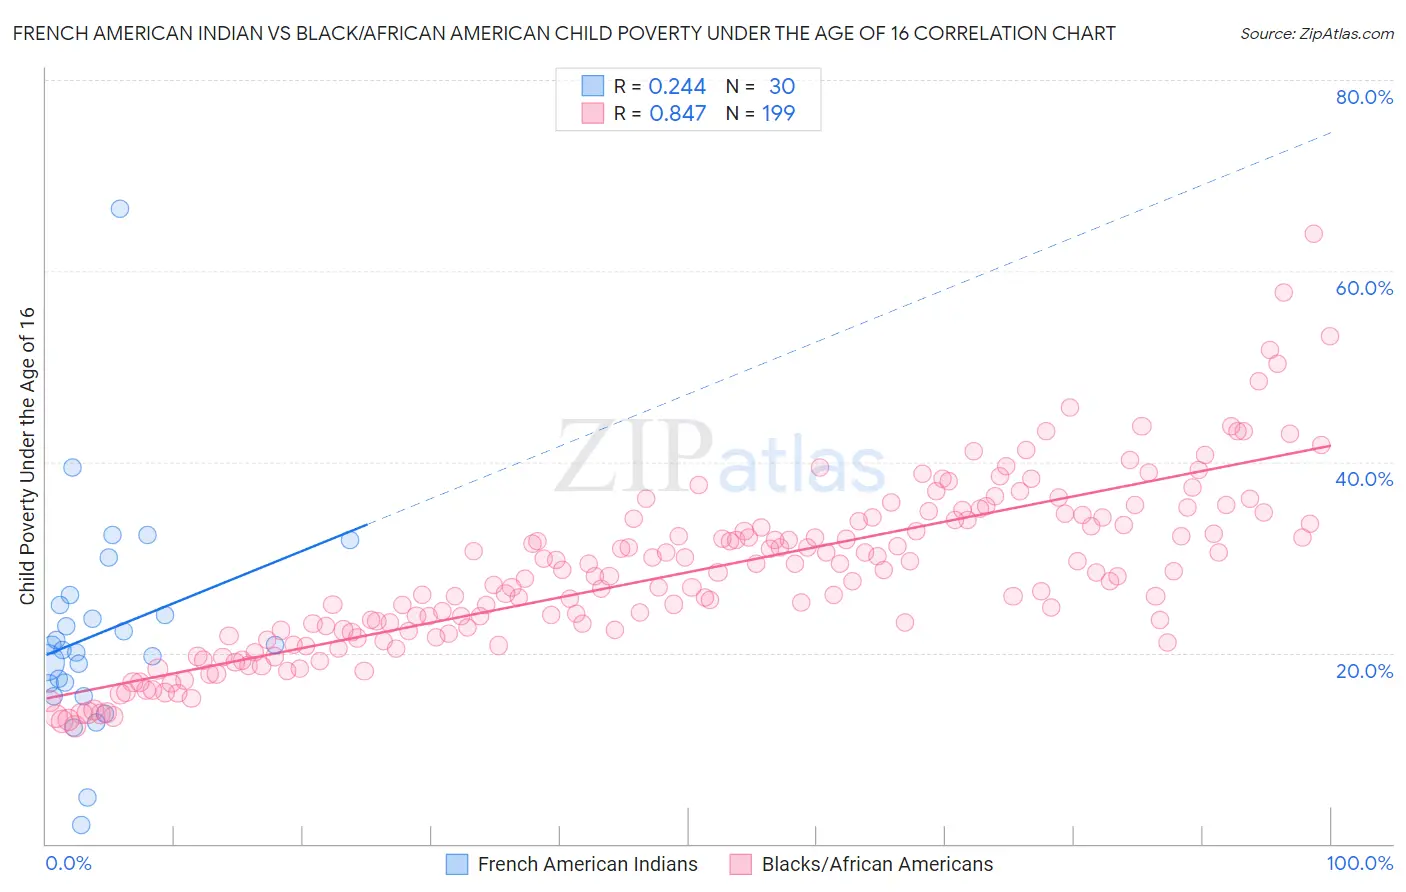 French American Indian vs Black/African American Child Poverty Under the Age of 16